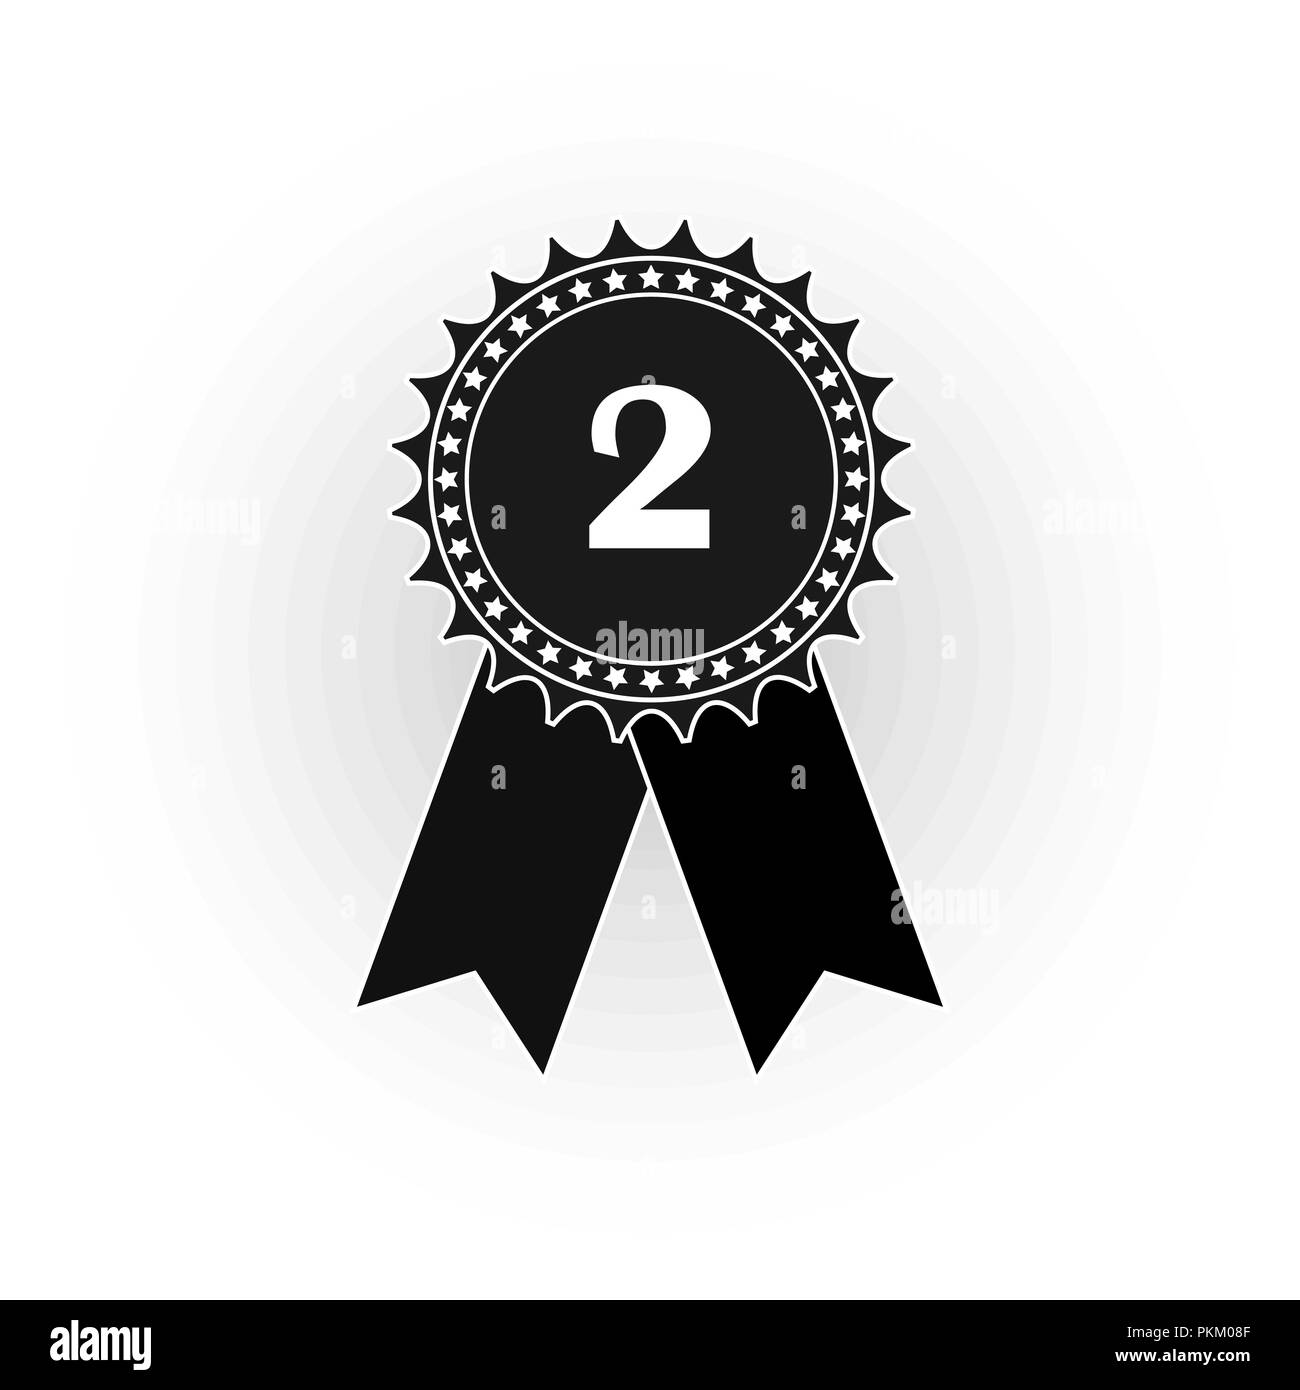 Medal icon with number two, flat black and white image Stock Vector